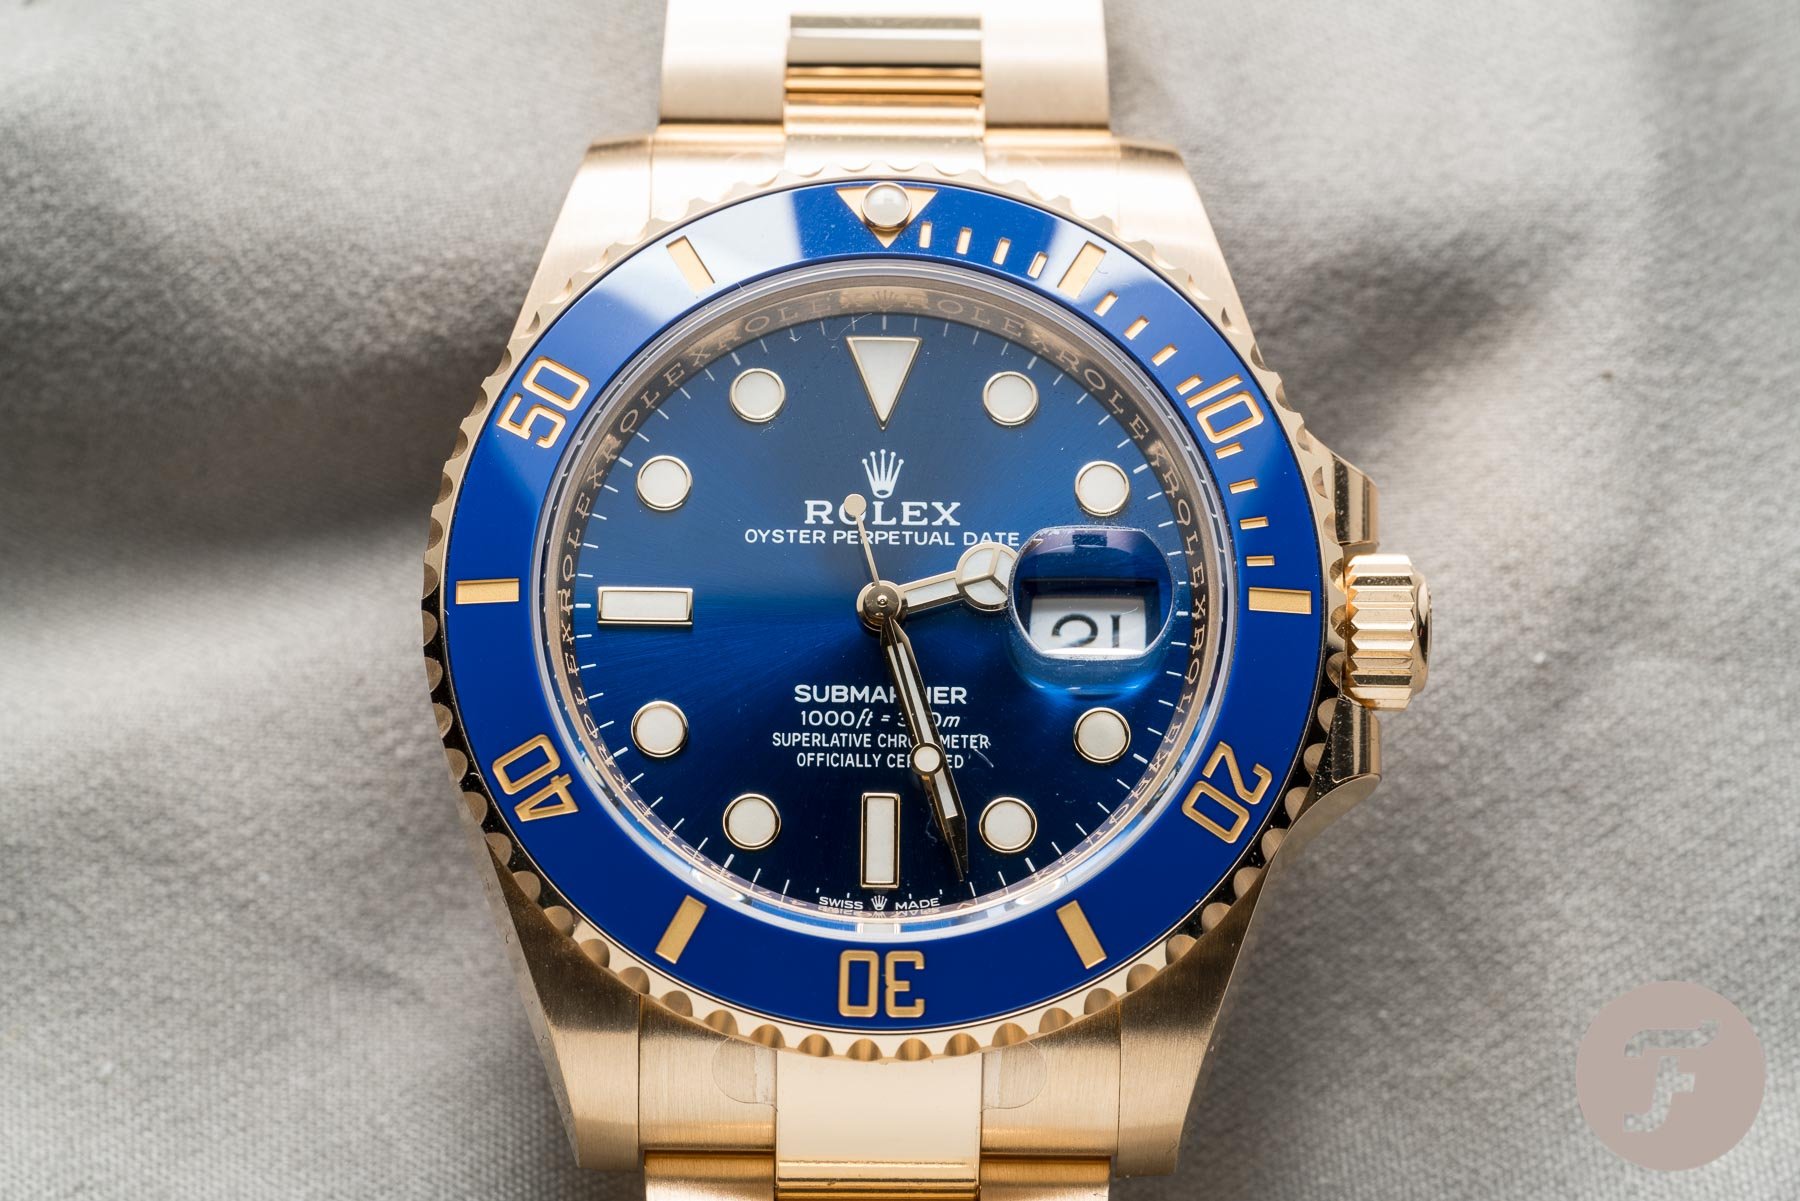 Rolex Submariner Date Steel & Yellow Gold 126613LB Blue Dial - Chronologie